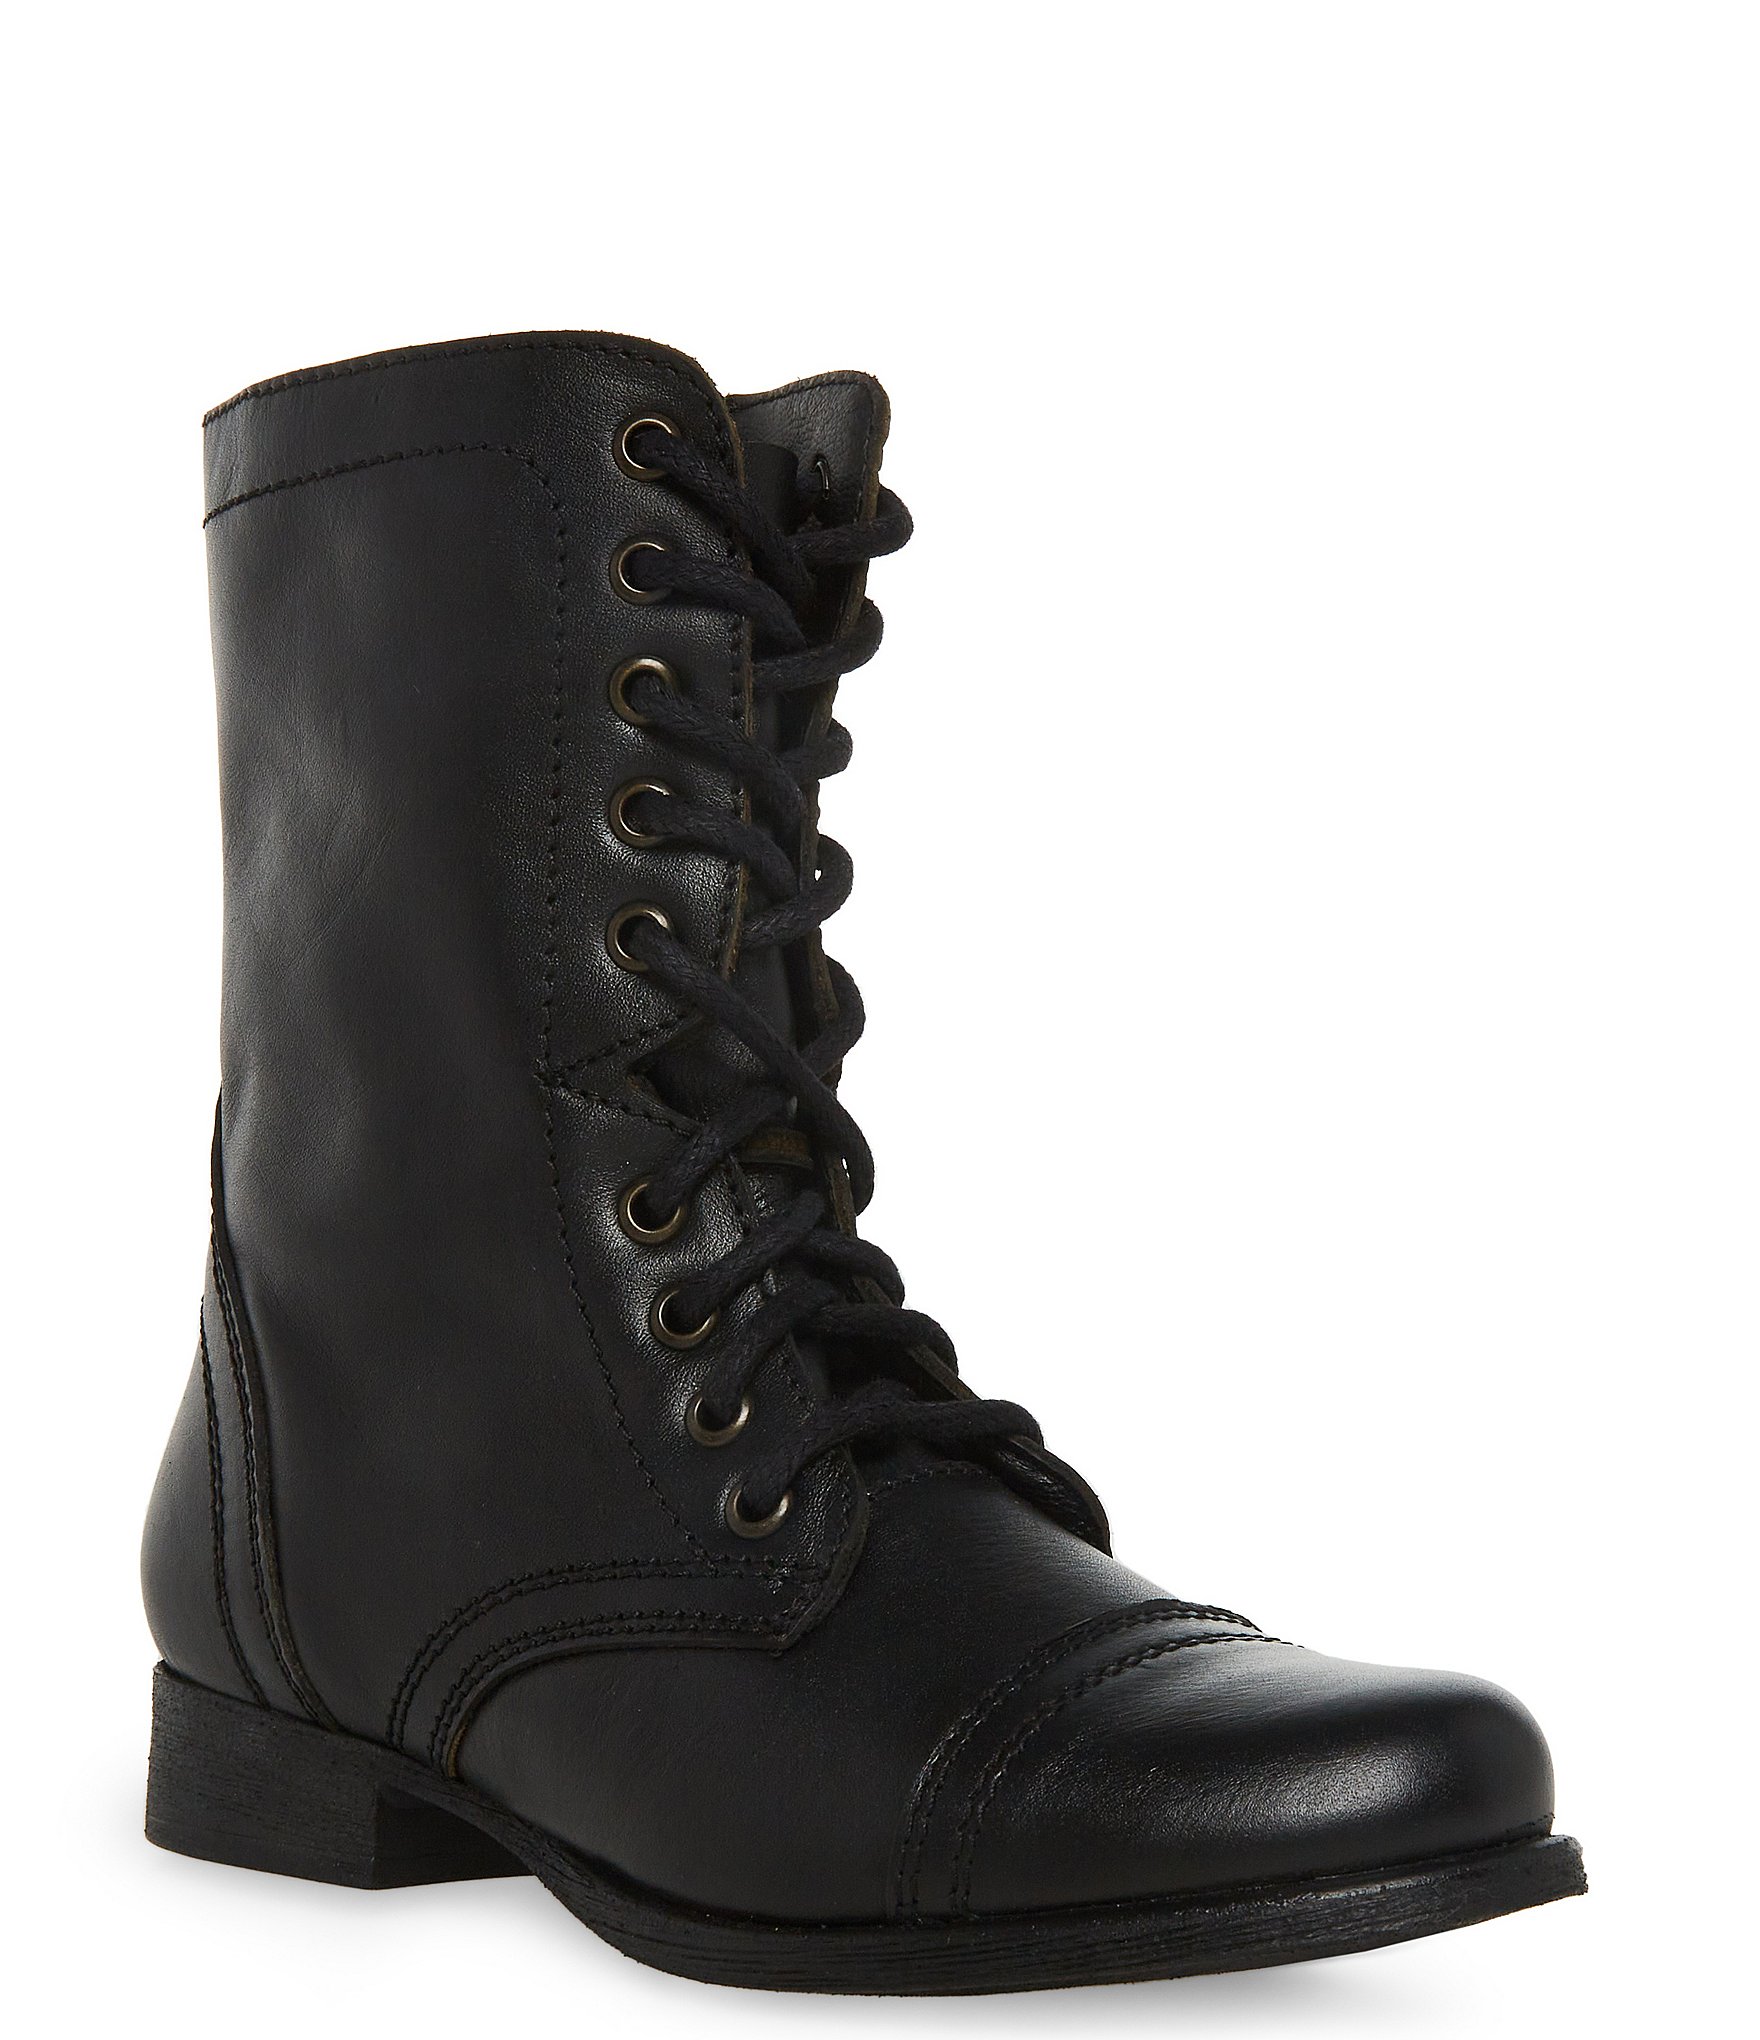 Steve Madden Military Discount | peacecommission.kdsg.gov.ng